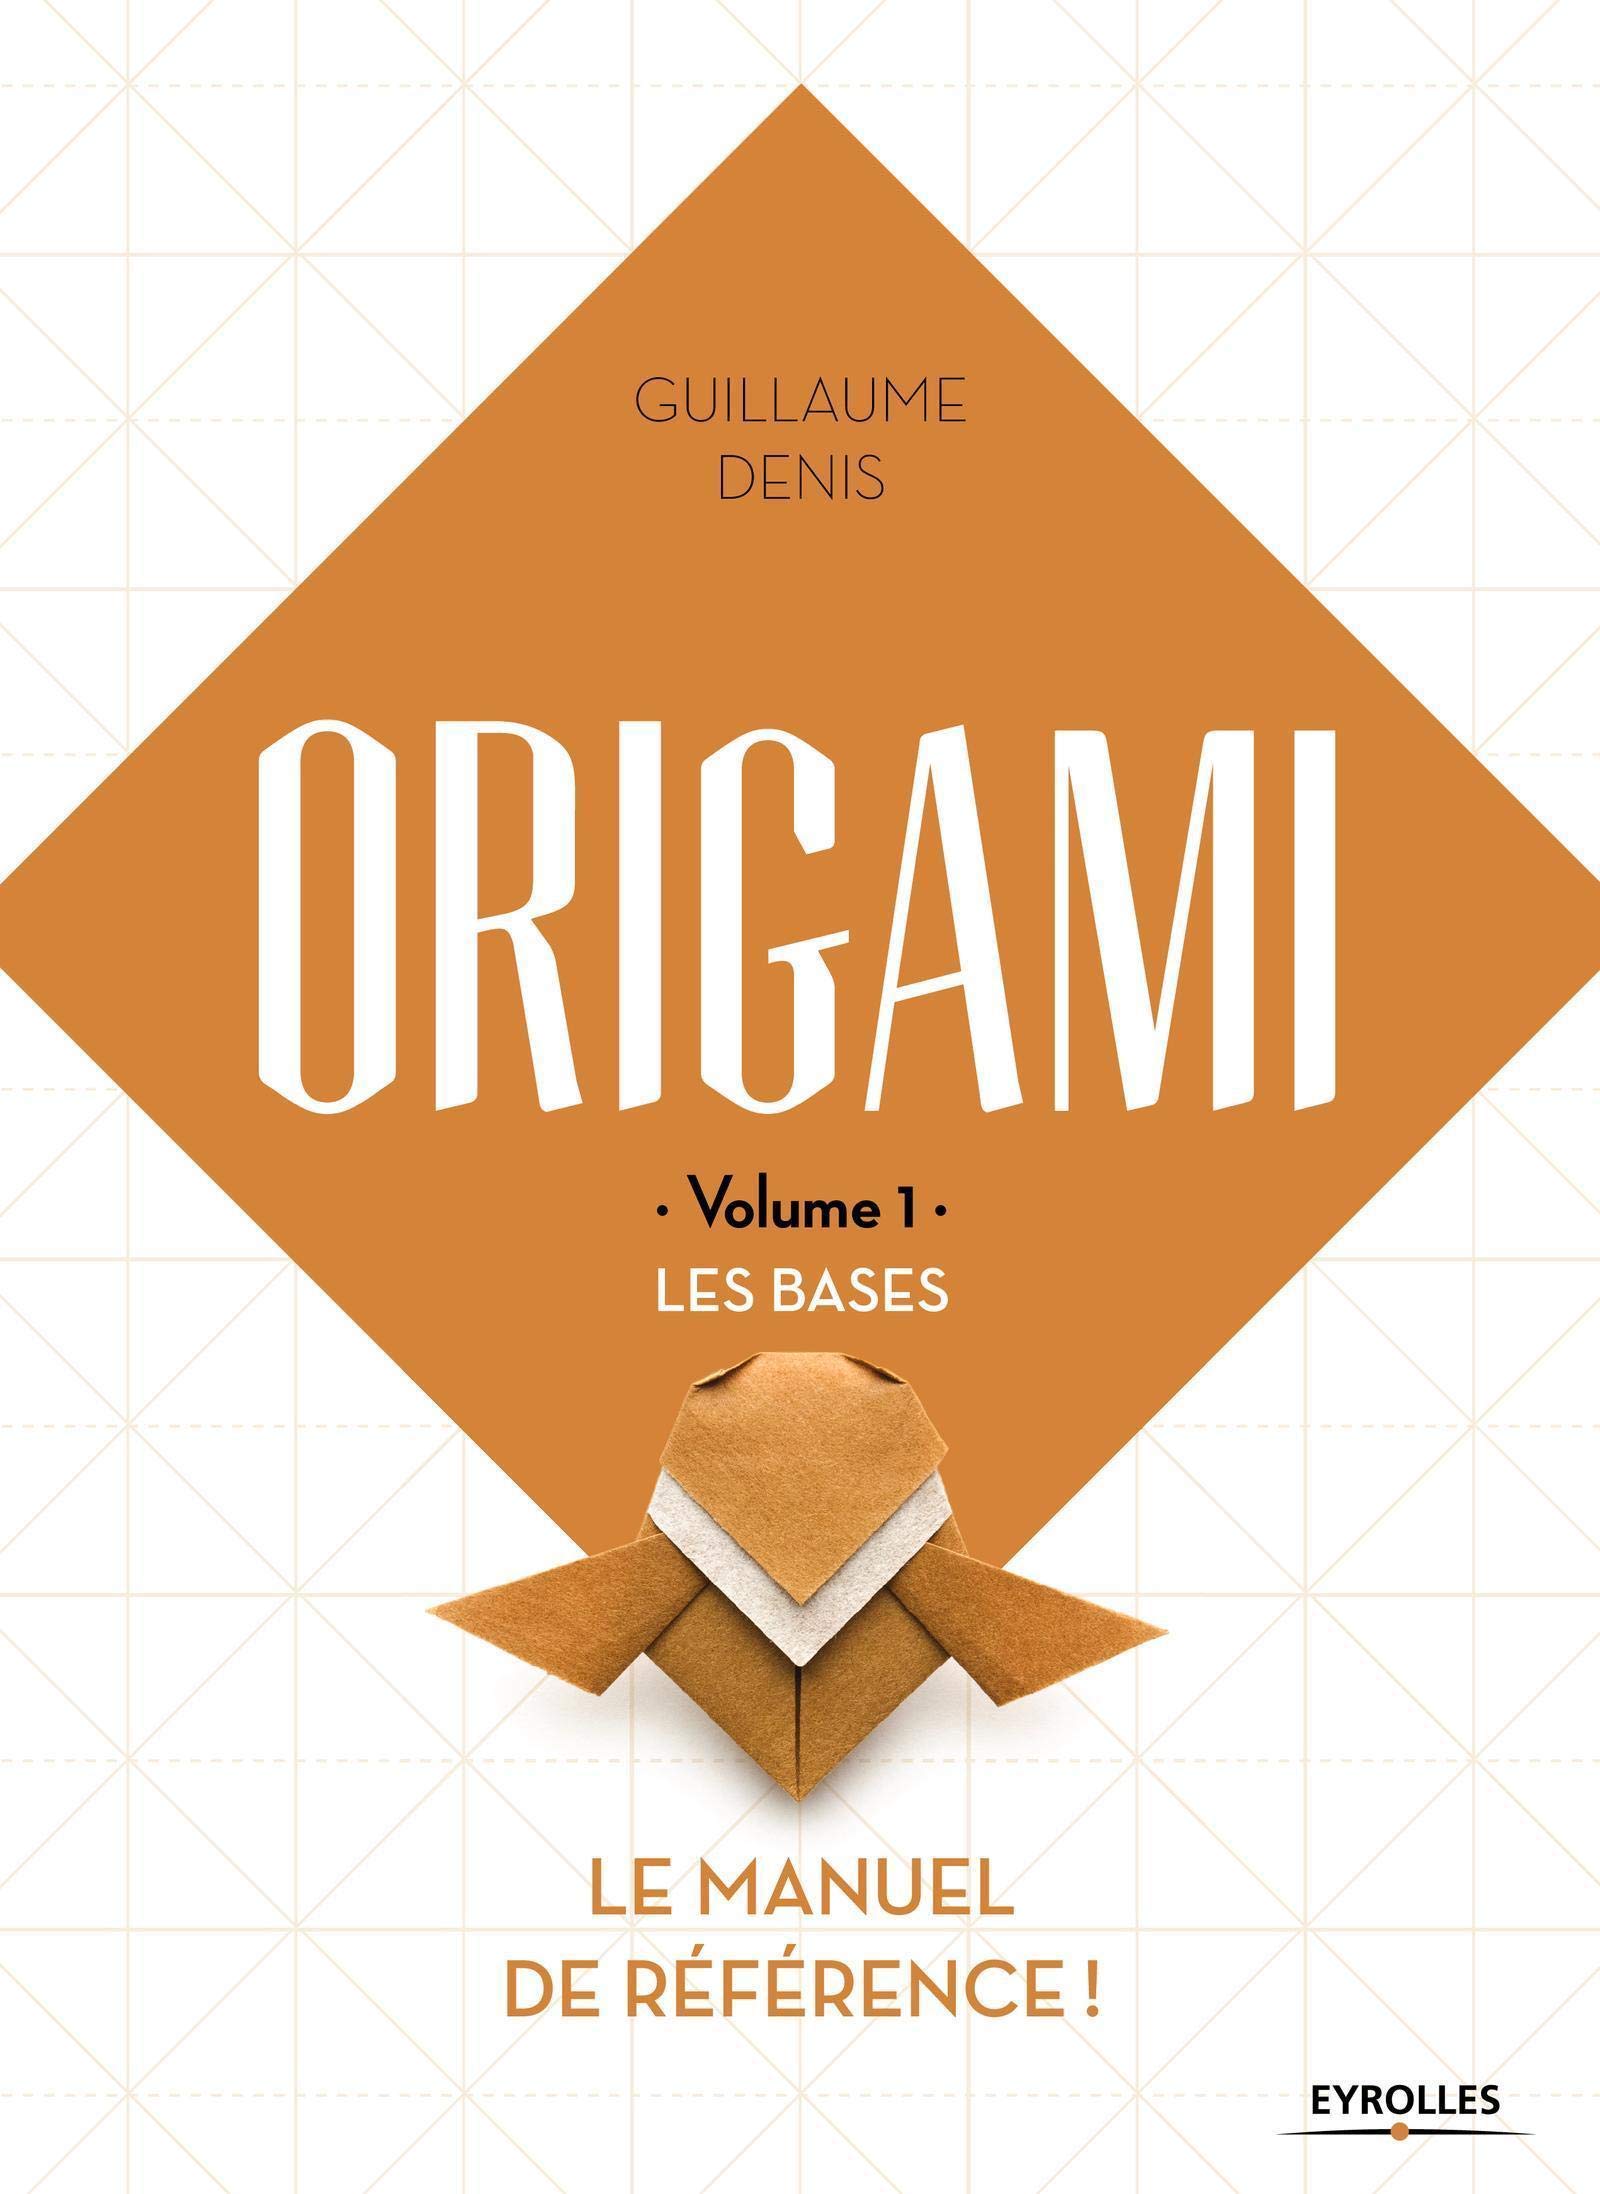 ORIGAMI - Volume 1 - LES BASES : page 118.